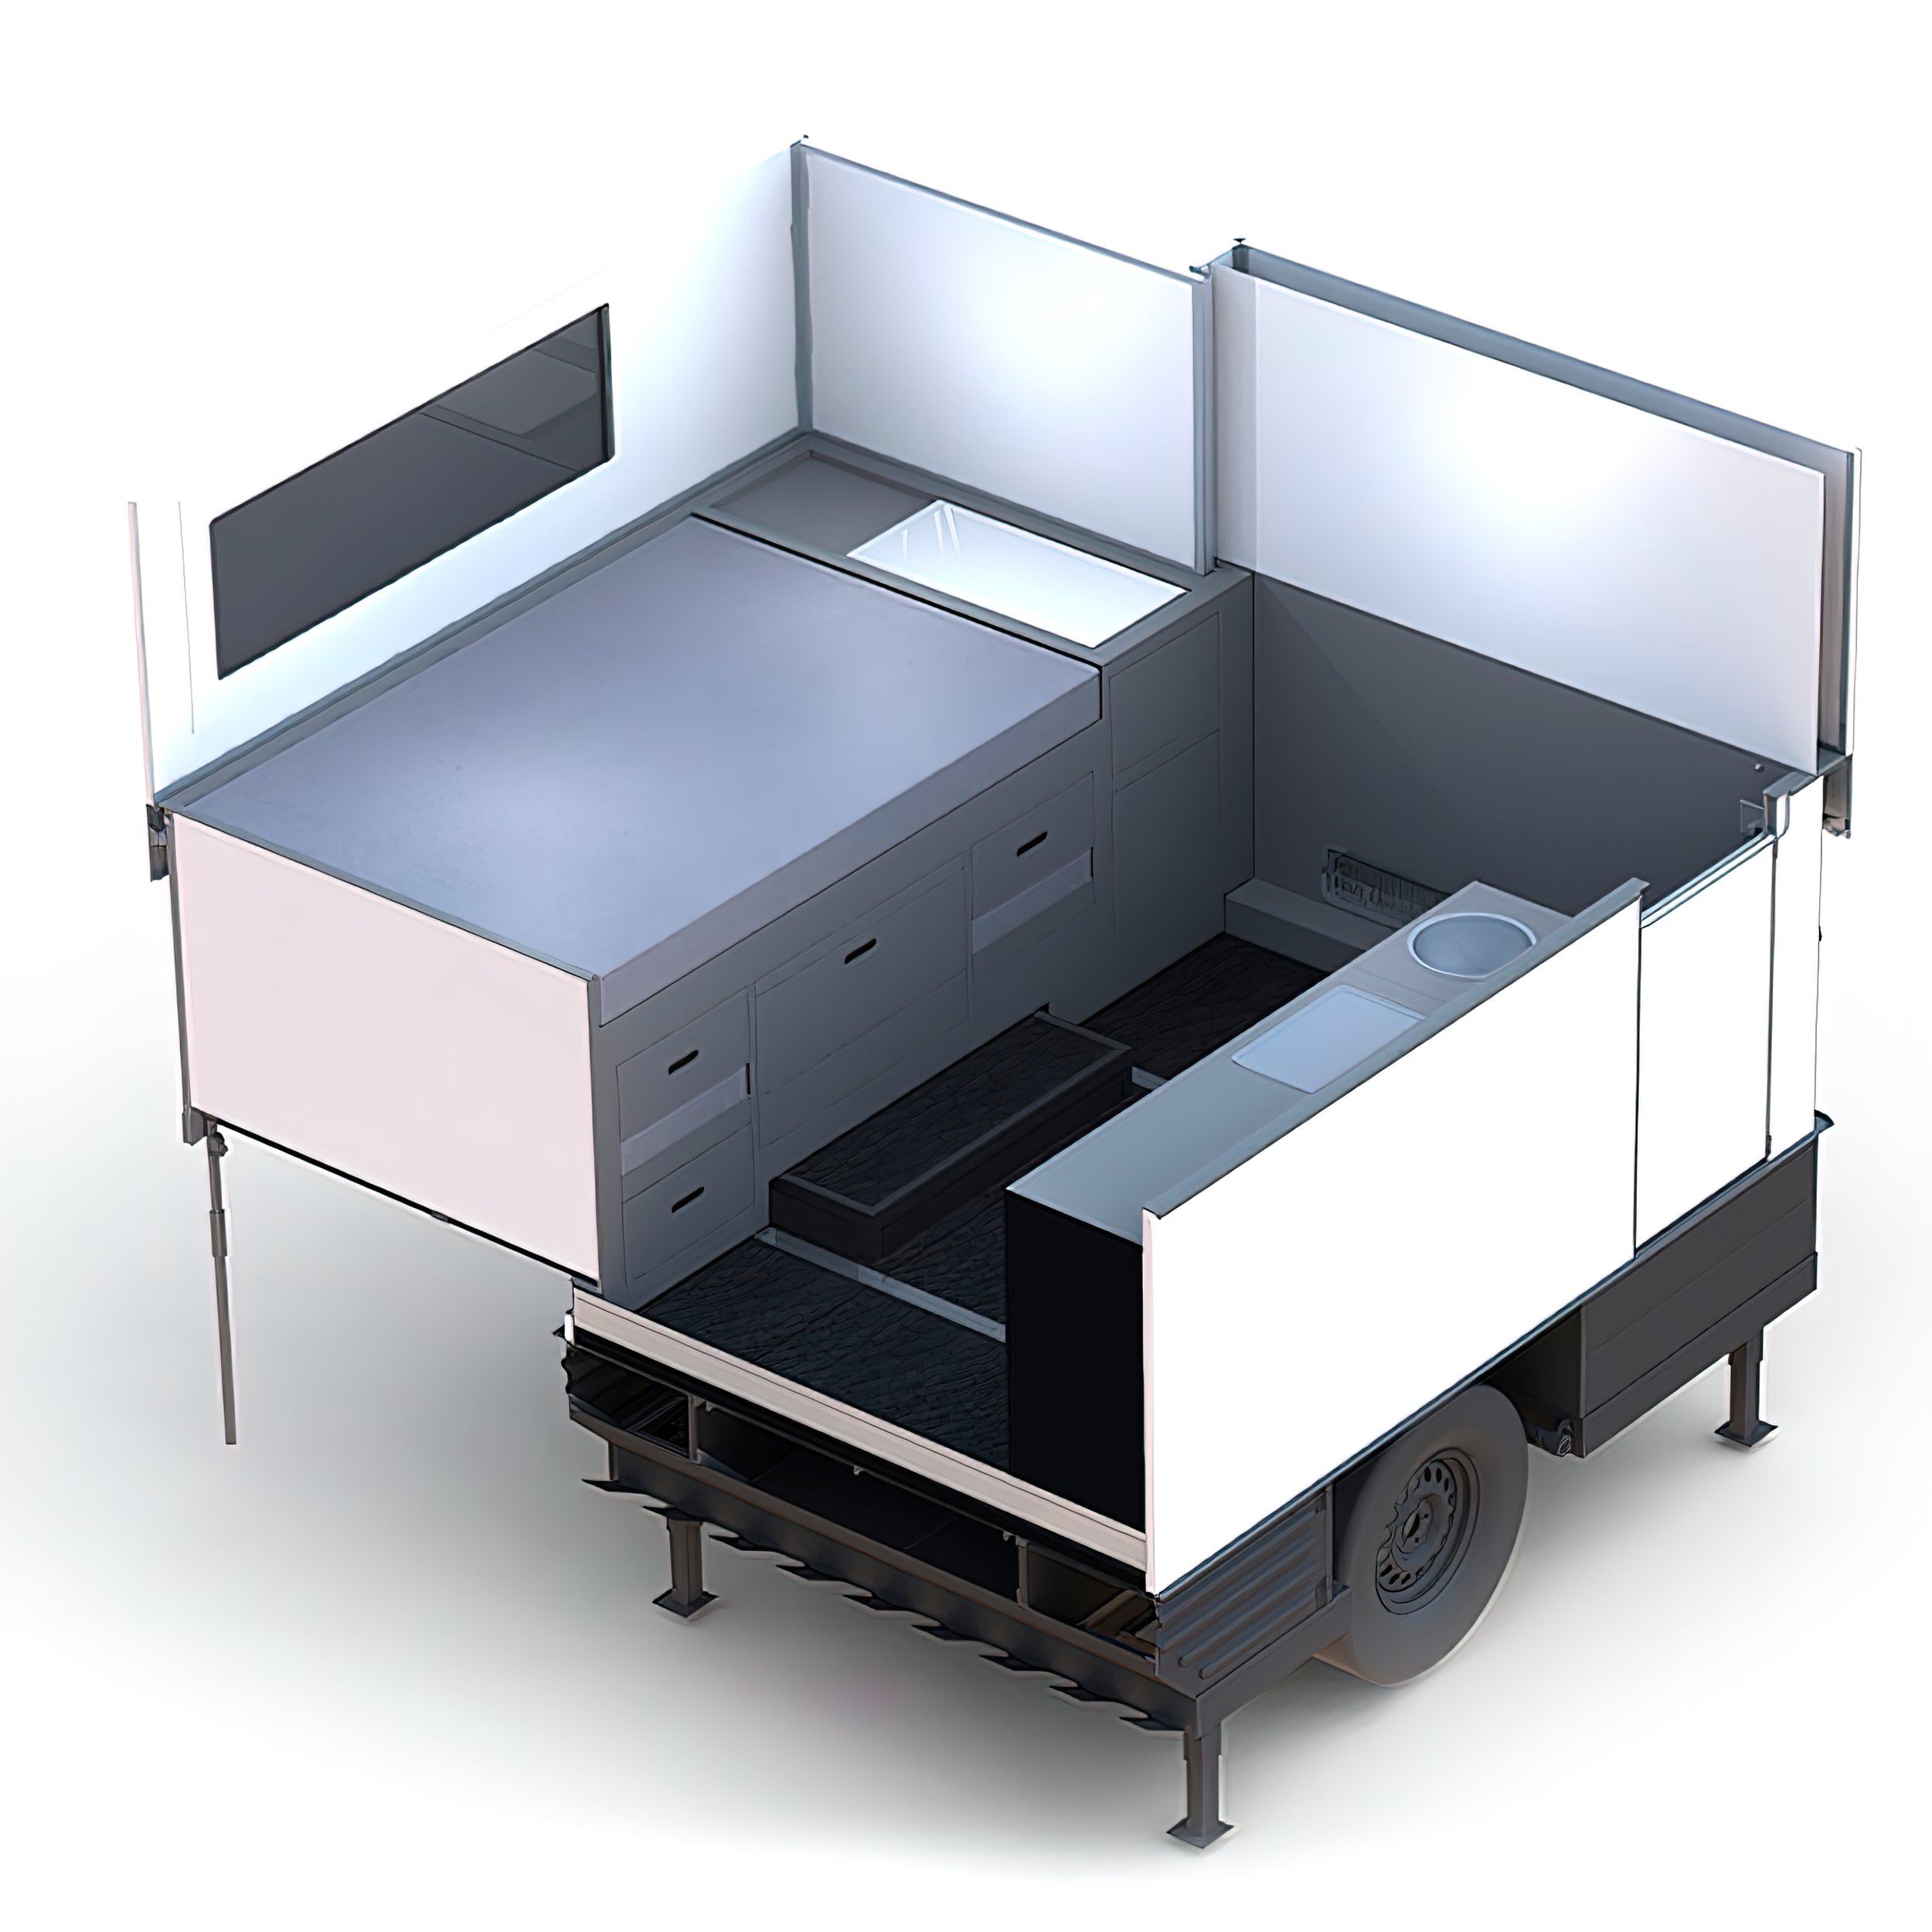  Today’s blog will look at the expanding camping pod called the Flexcamp, which can be set up from a truck bed or a trailer.&nbsp;&nbsp; 